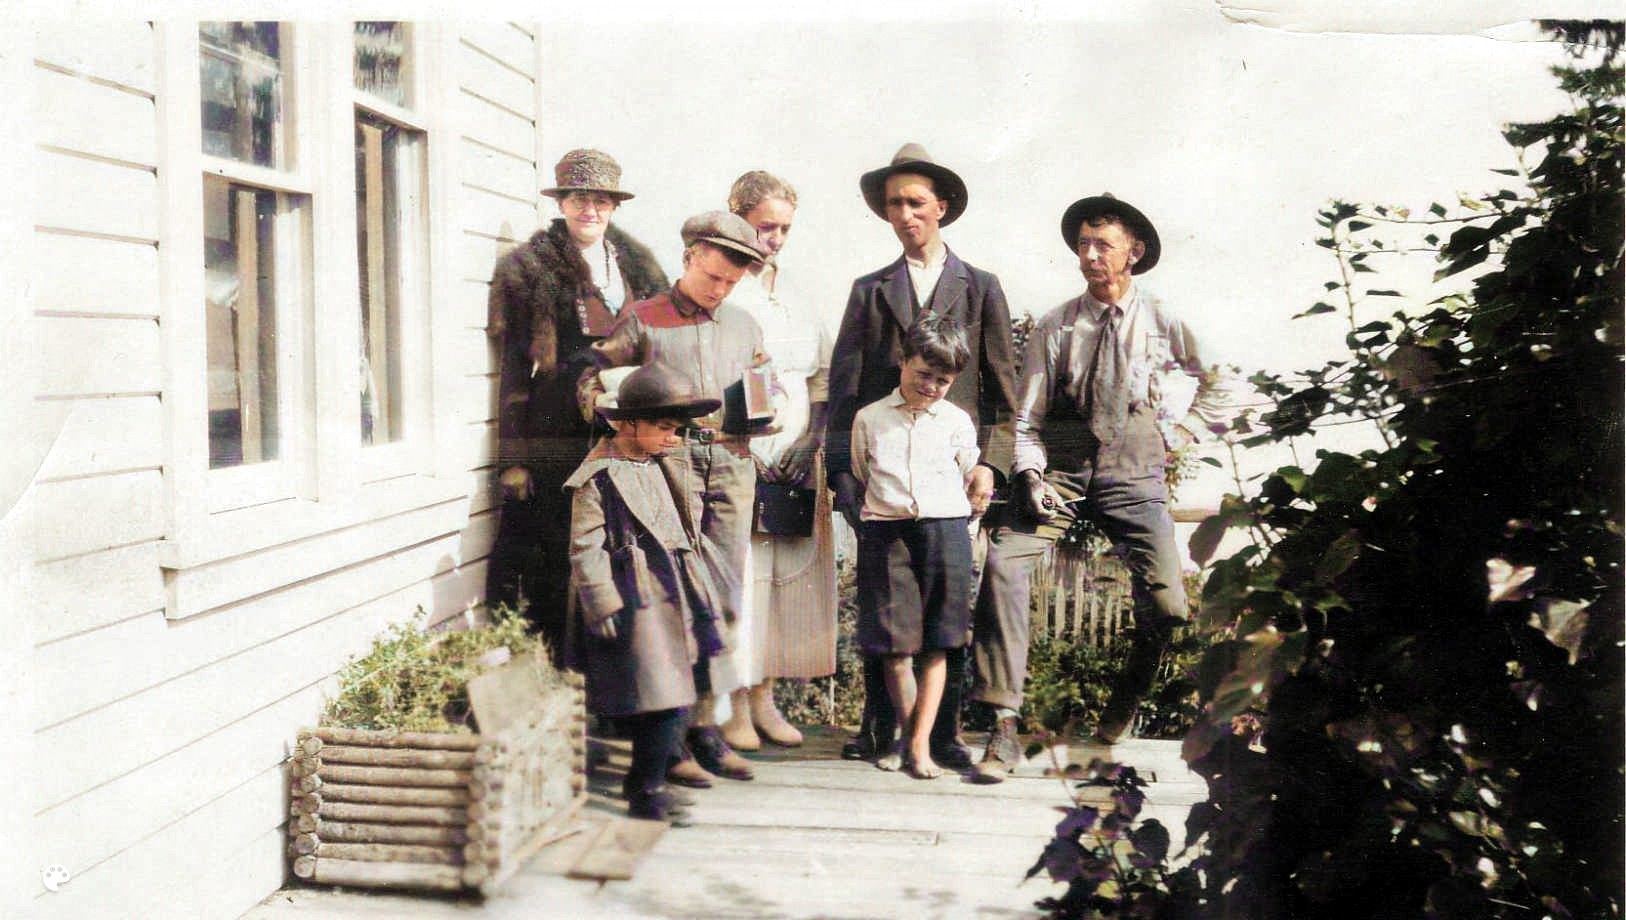 Trygve and family in 1921